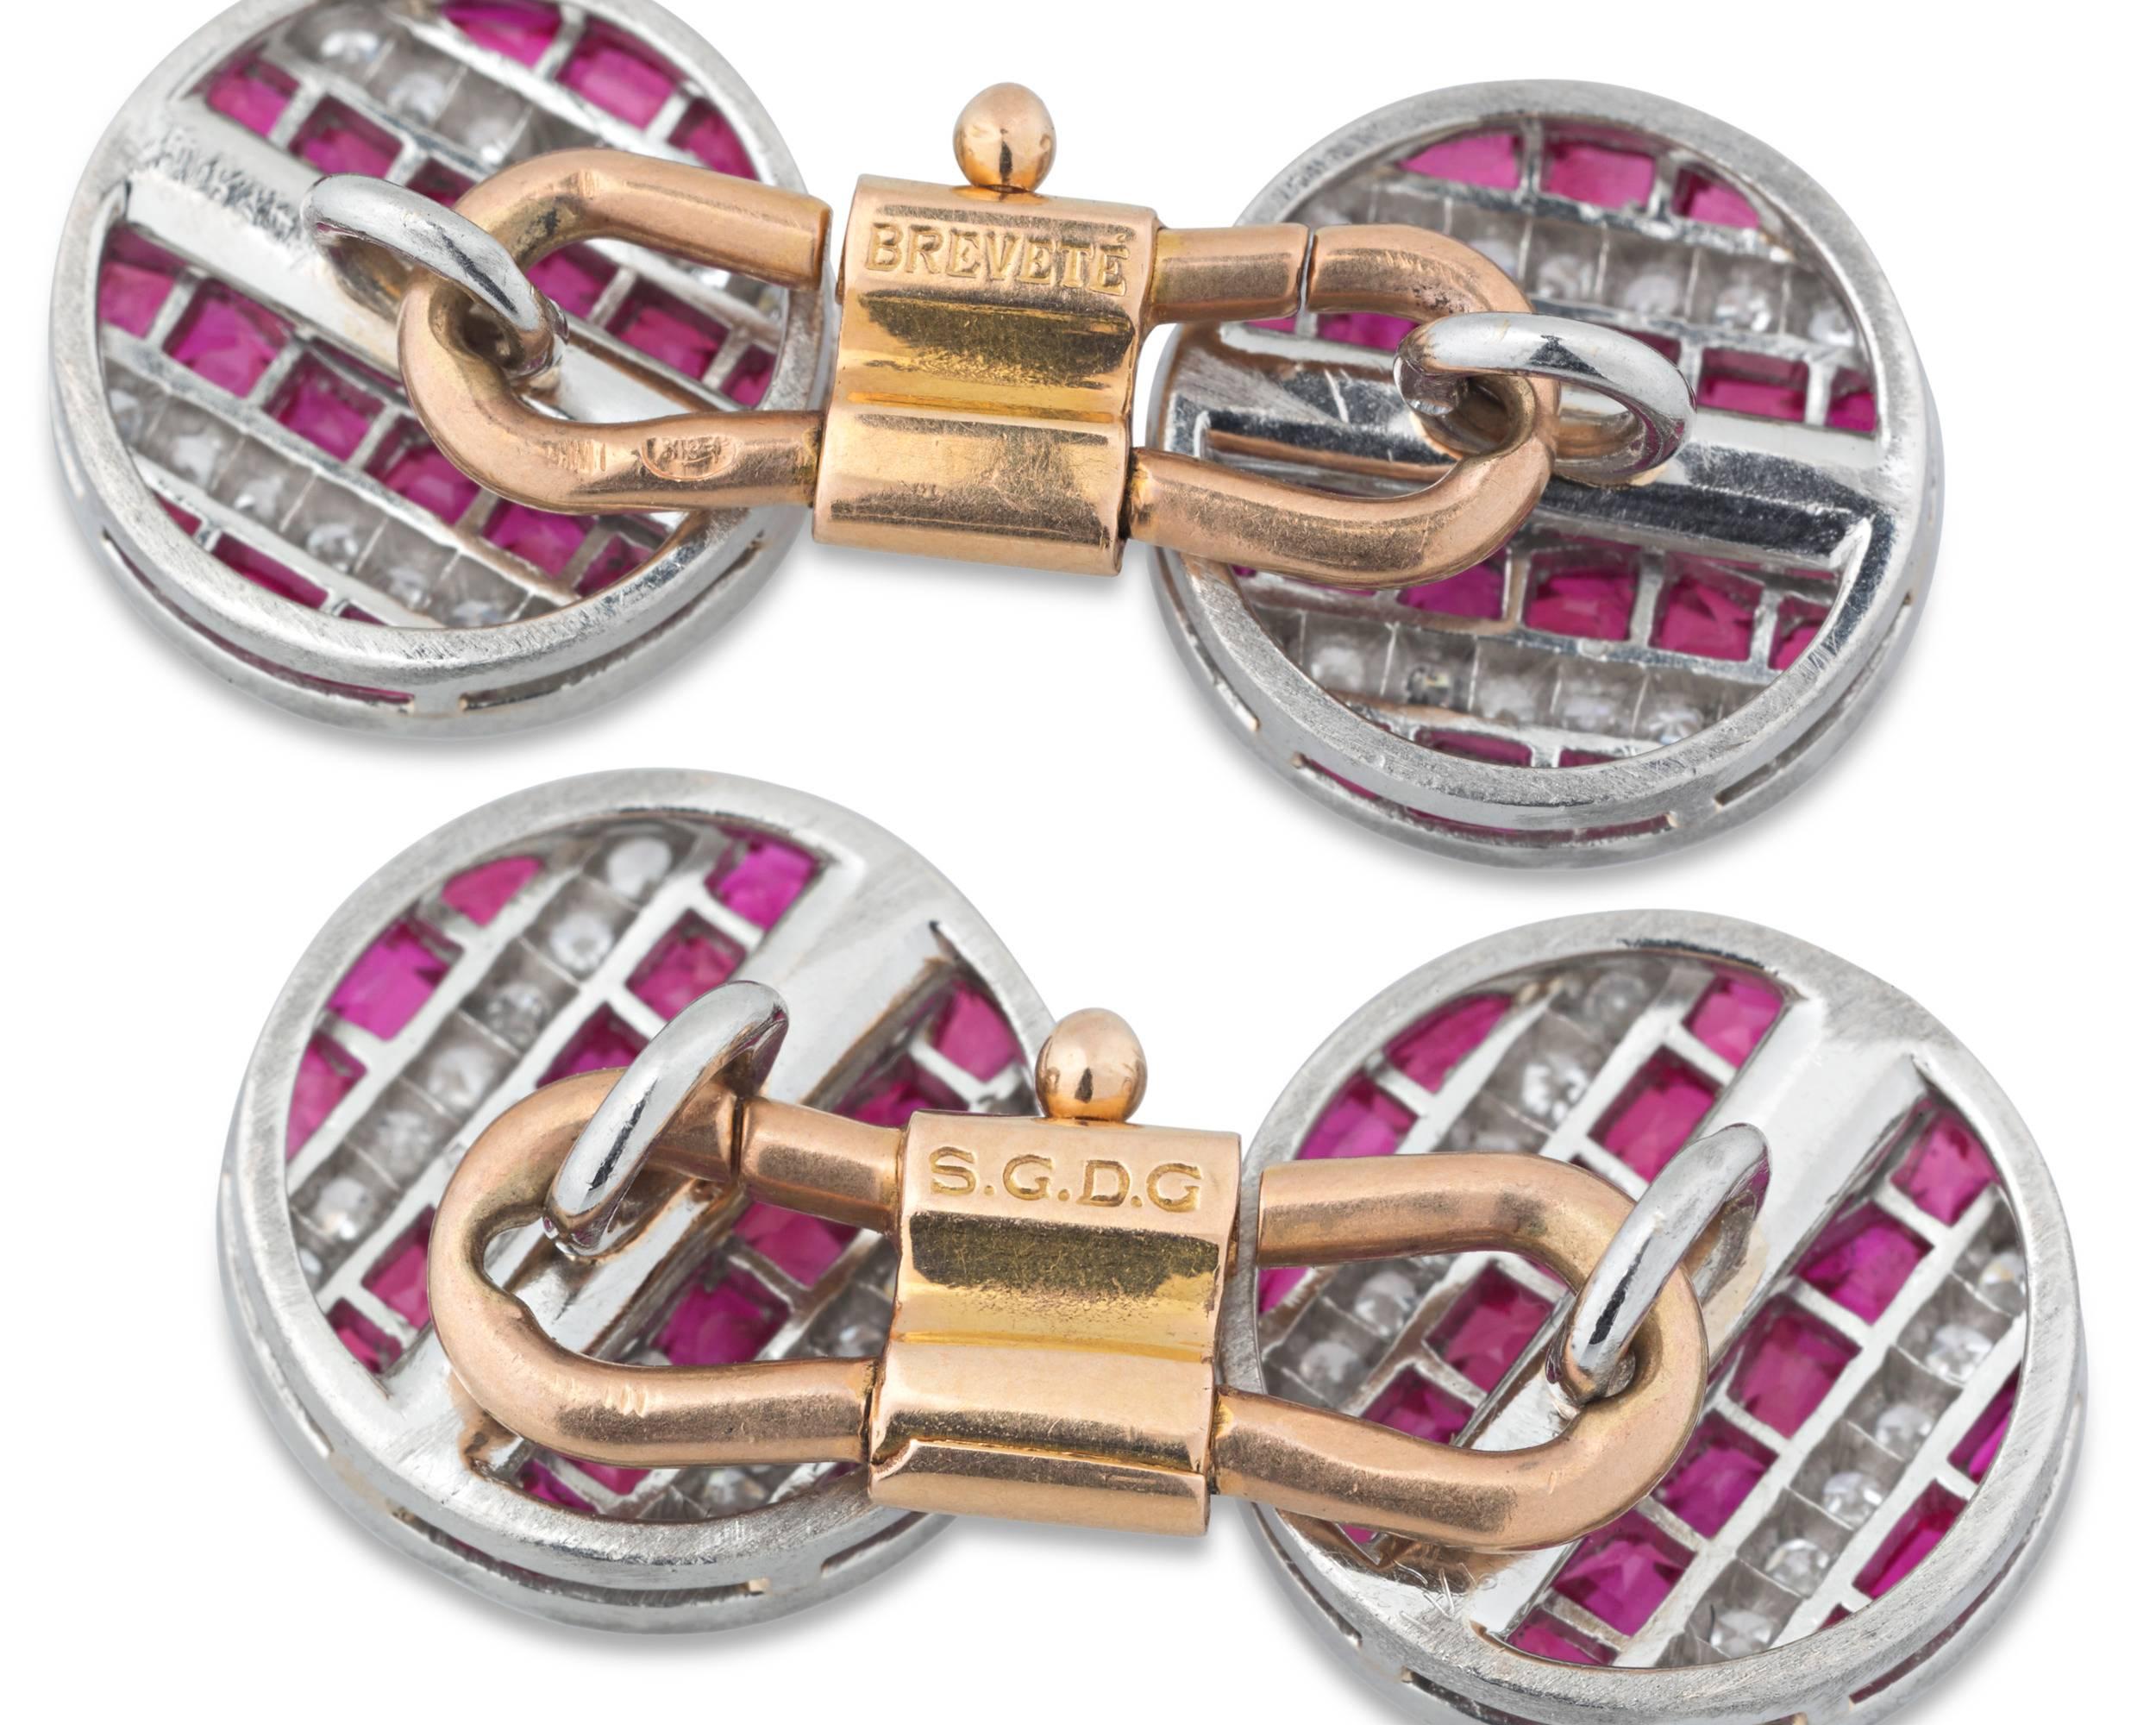 This classic set of French cufflinks and shirt studs brings together style and functionality, making them the perfect accent for the modern gentleman's ensemble. The eye-catching suite glistens with alternating rows of dazzling white diamonds and